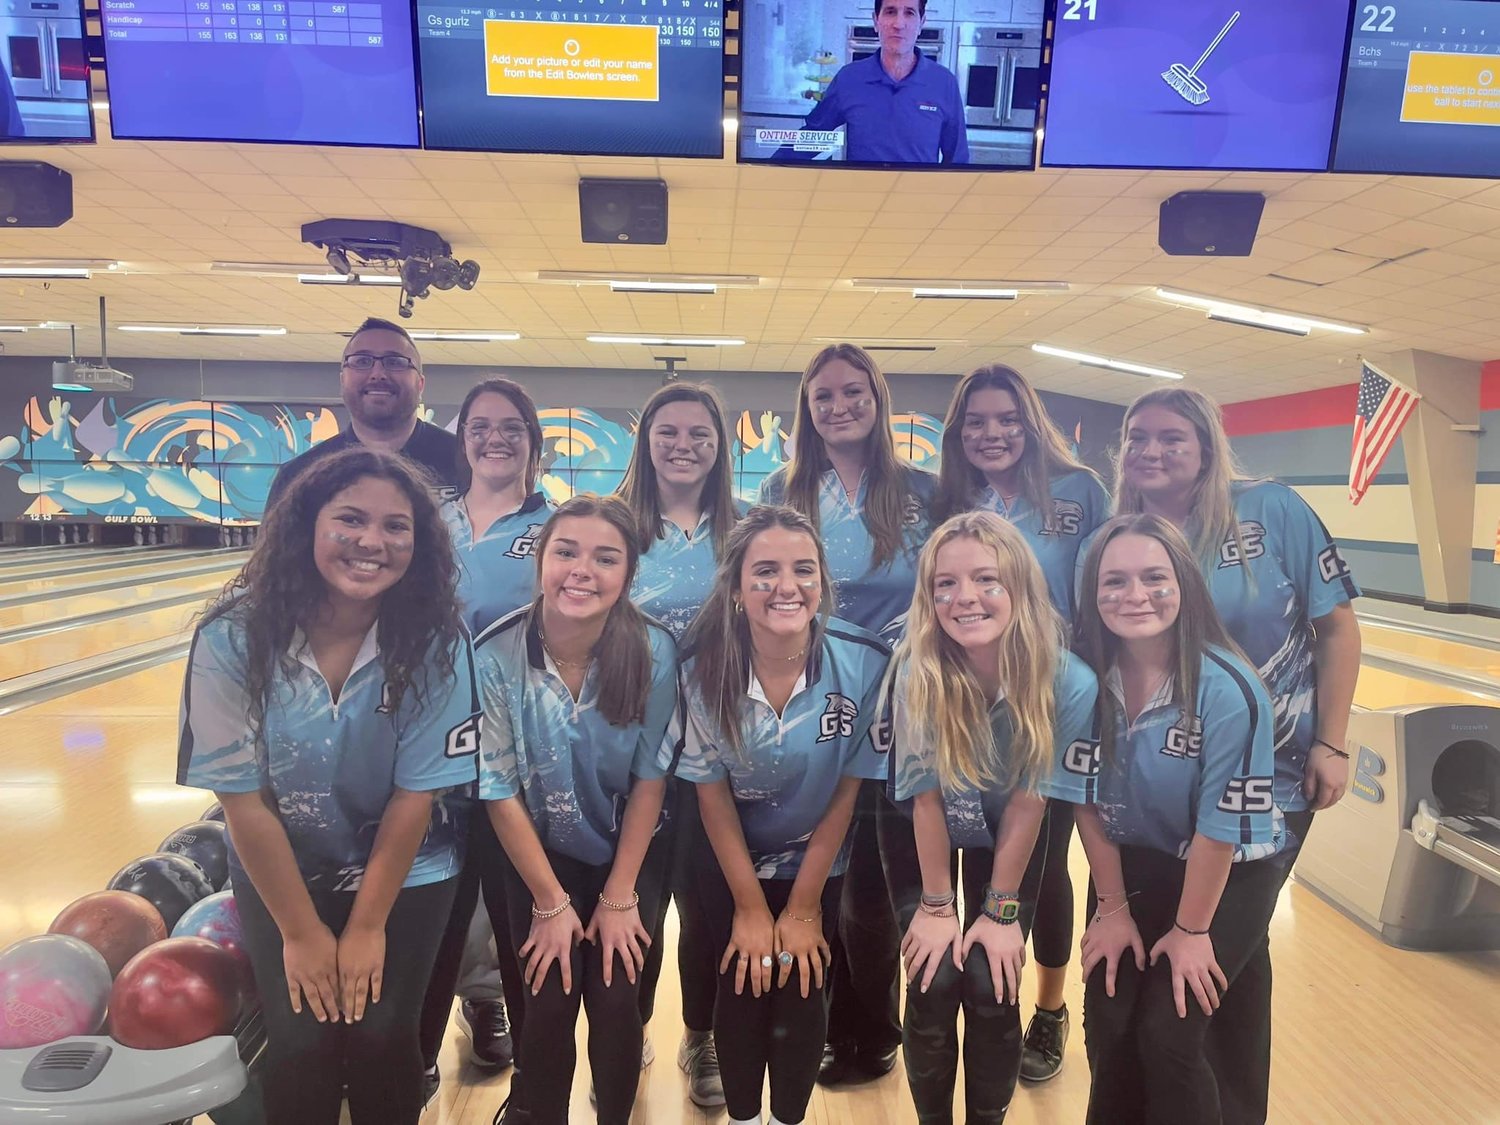 The Gulf Shores girls’ bowling team is bound for the South Regional Championship for the seventh straight season after finishing in the top two during regular-season play. Eastern Shore Lanes in Spanish Fort hosts the regional tournament starting tomorrow.